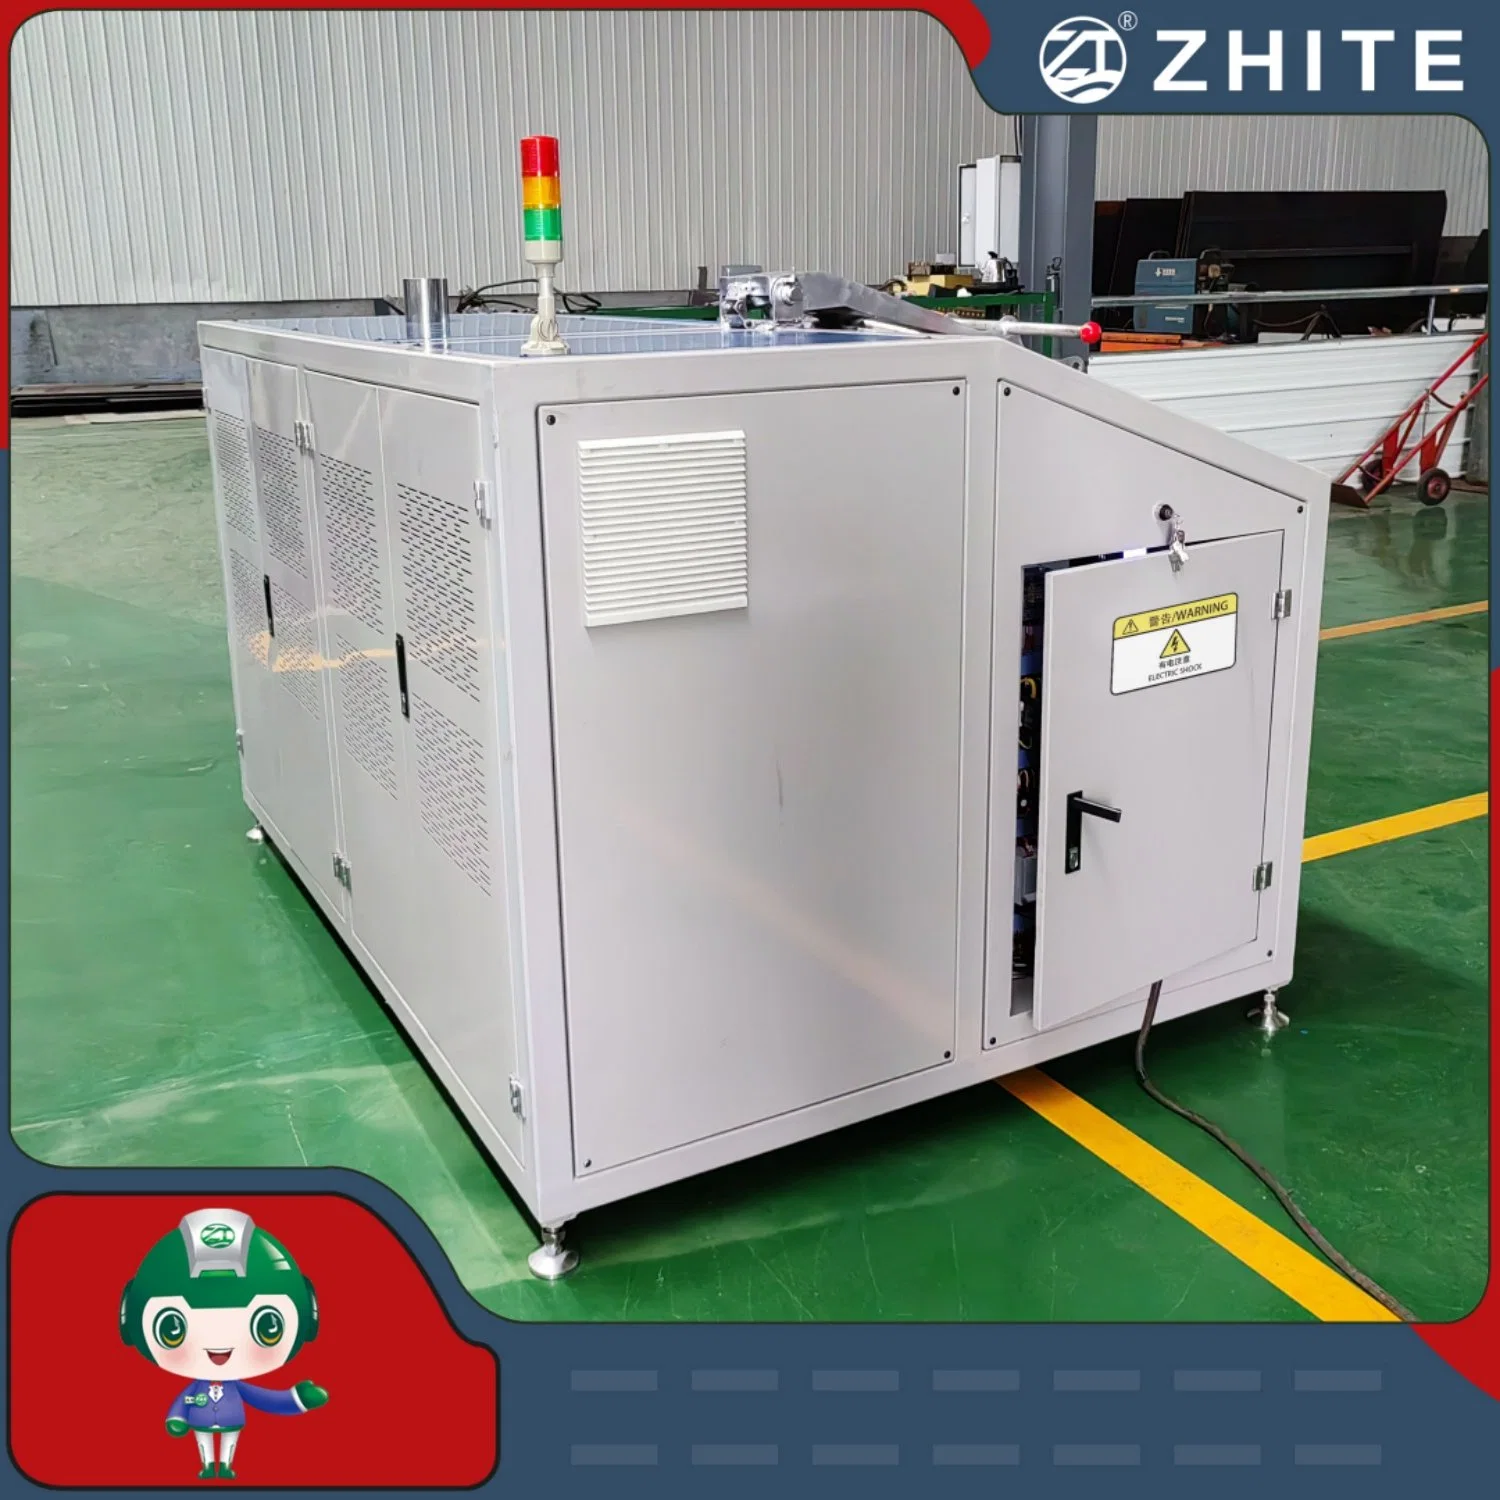 Medical Waste Microwave Treatment Process Equipment for Clinic Hospital Disinfection